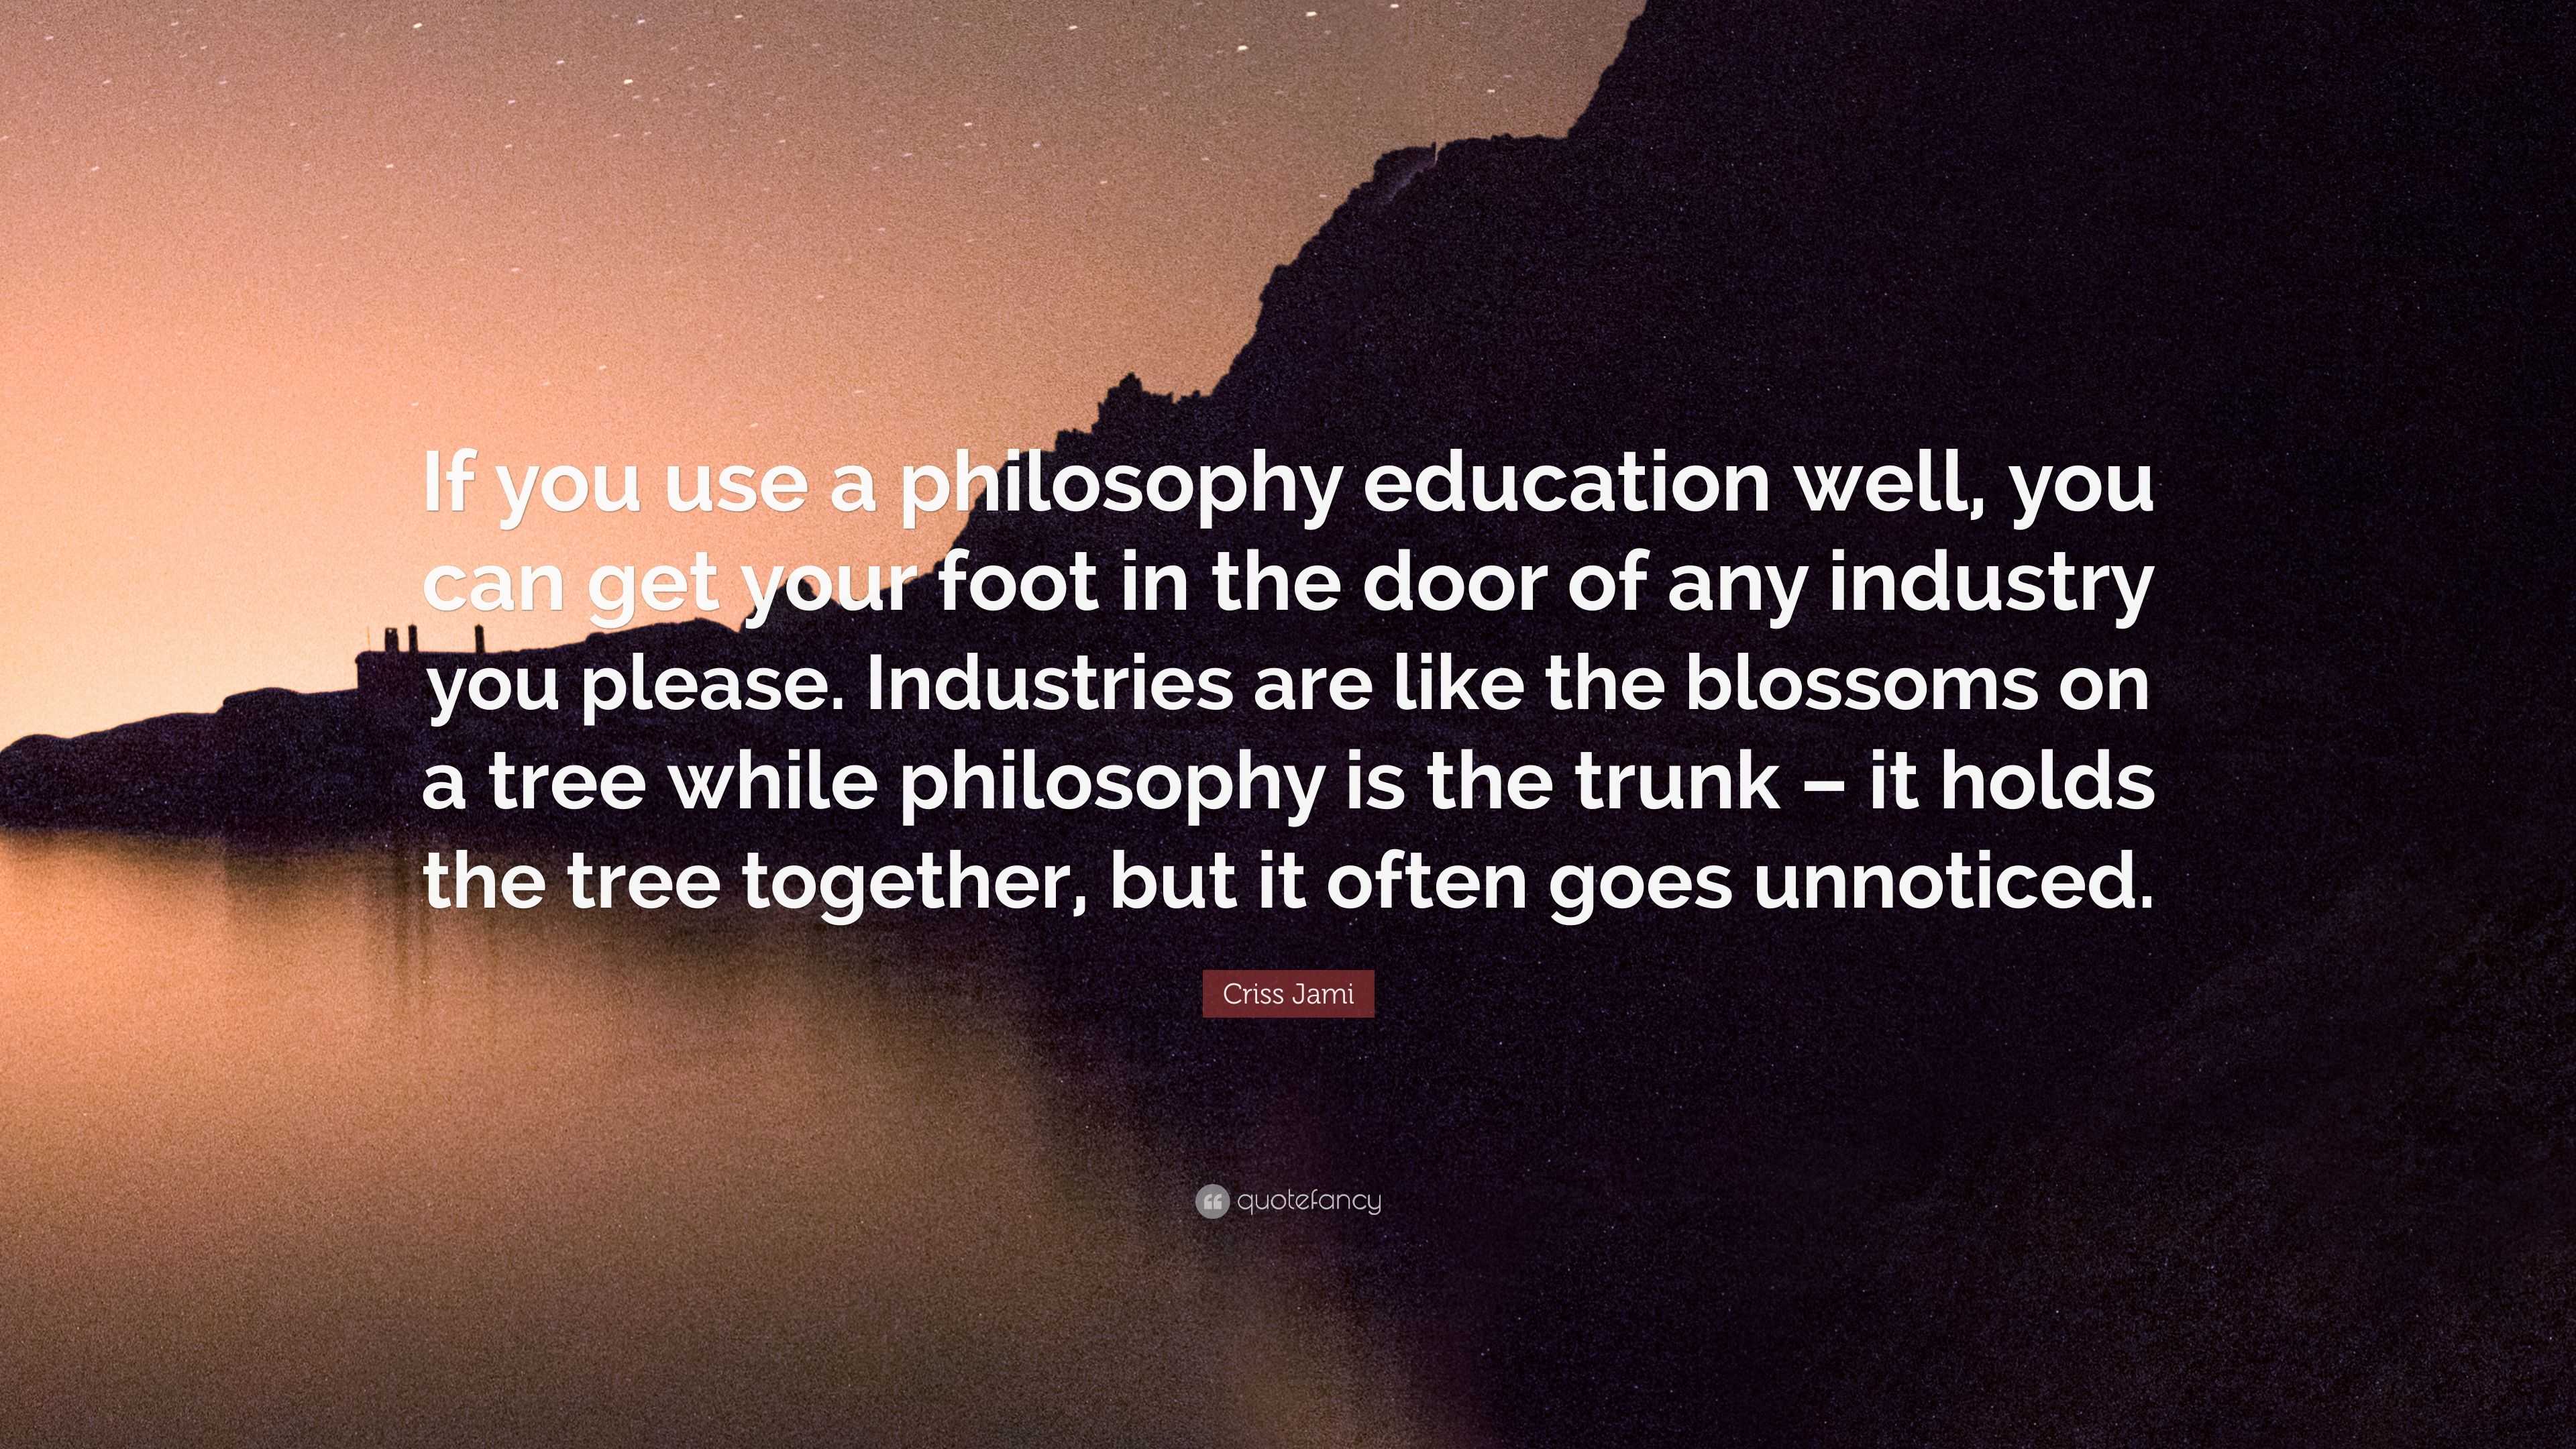 Criss Jami Quote “If you use a philosophy education well